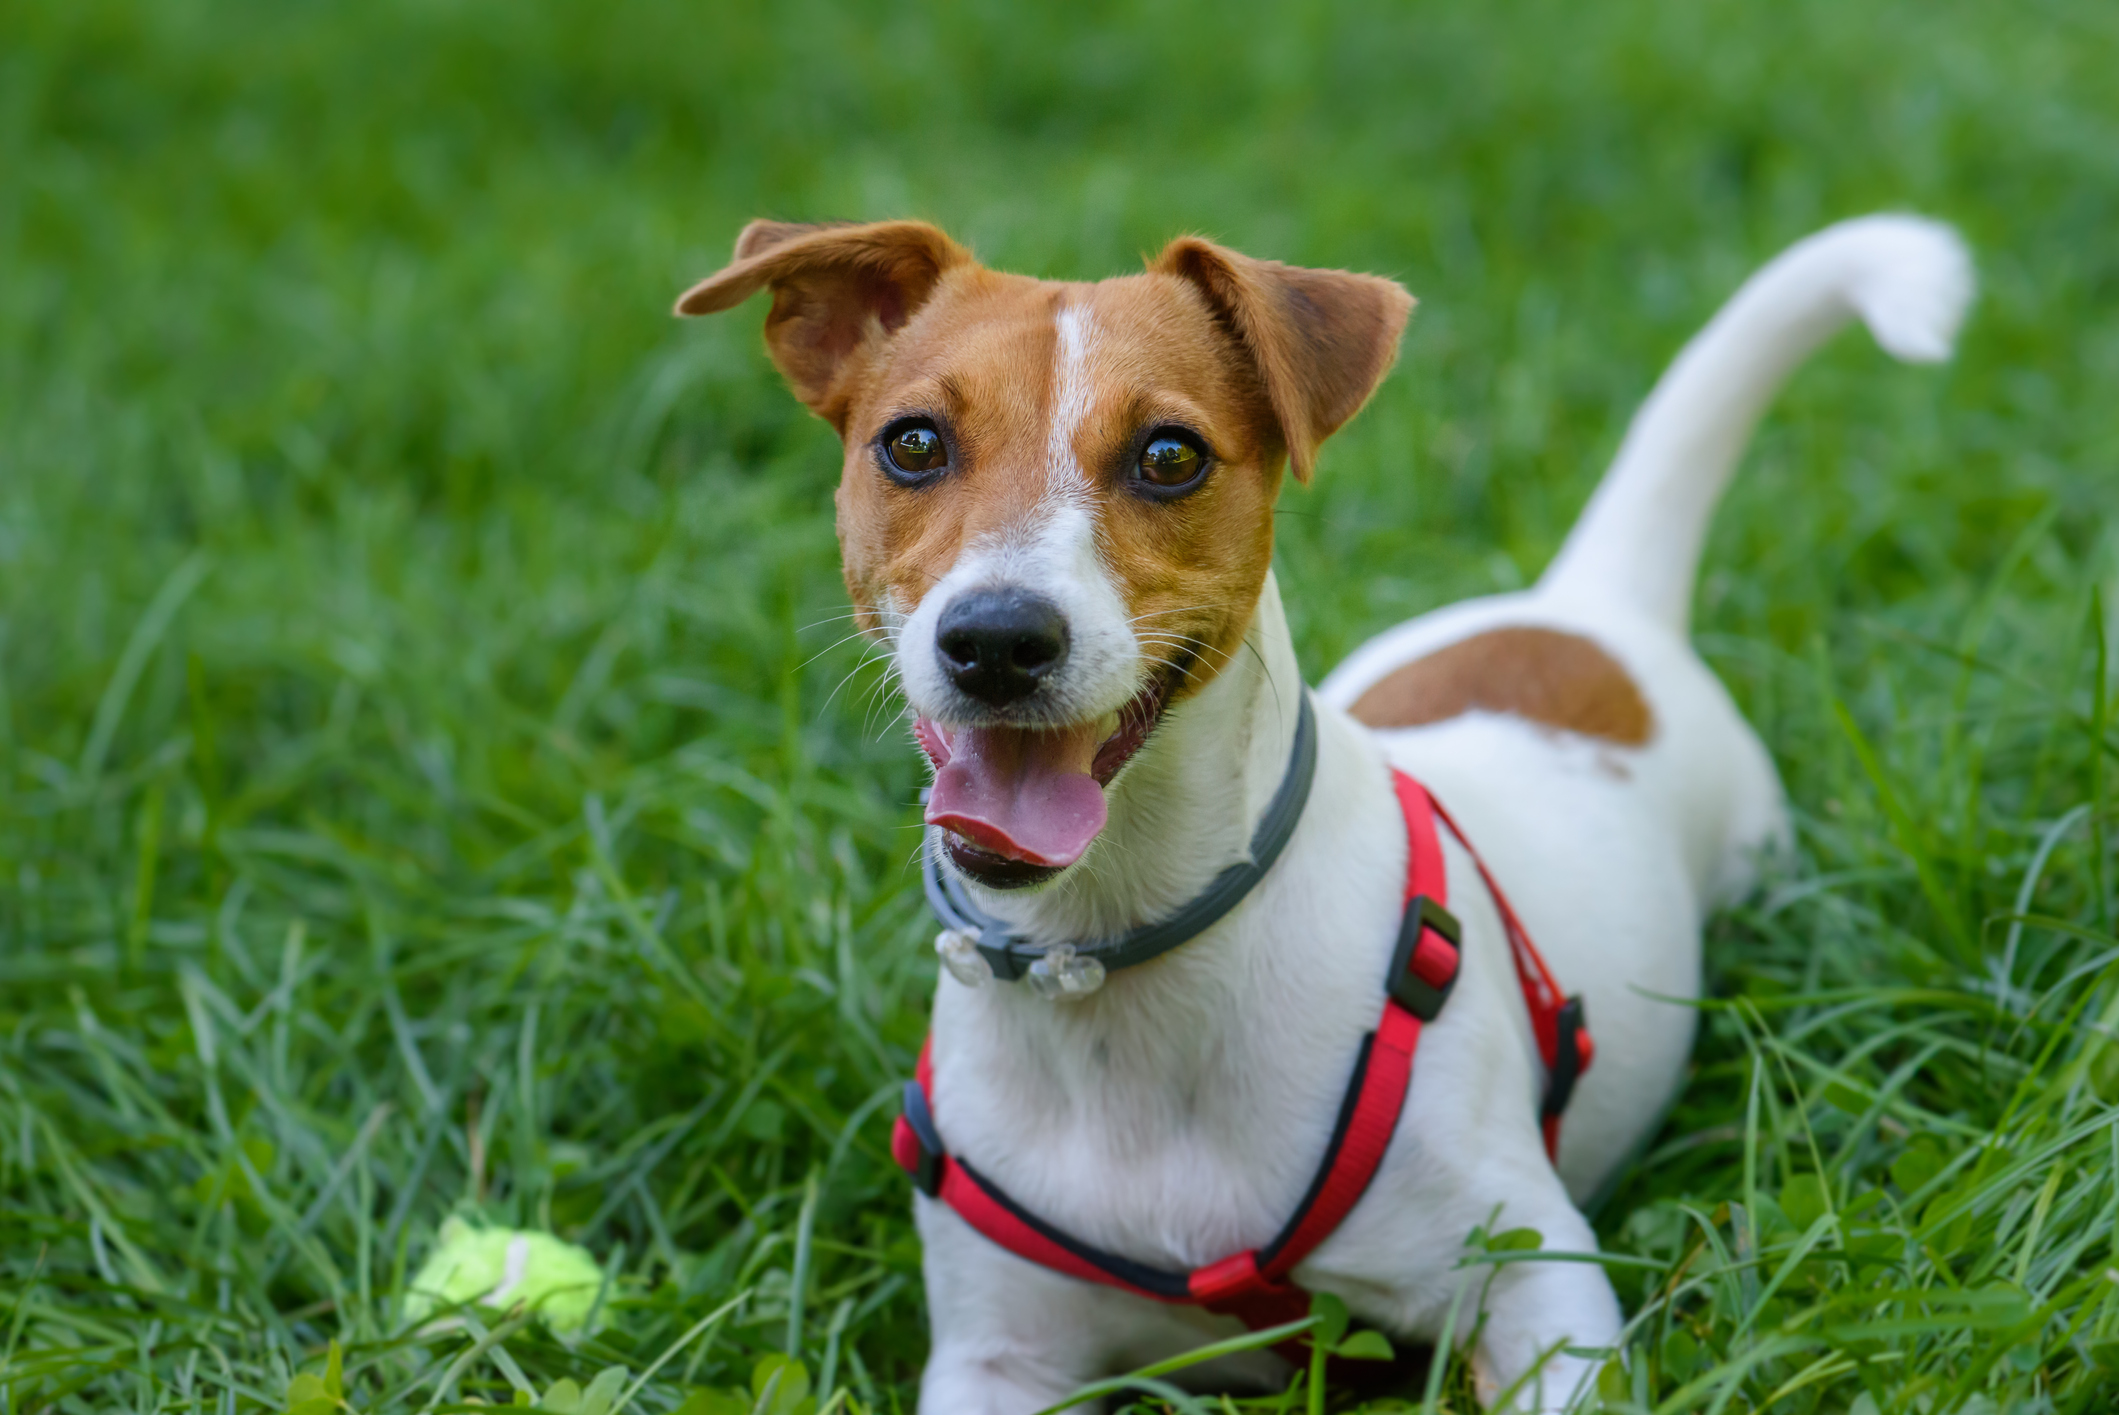 Jack Russell Terrier lying in the grass with a tennis ball, wearing a harness and flea collar